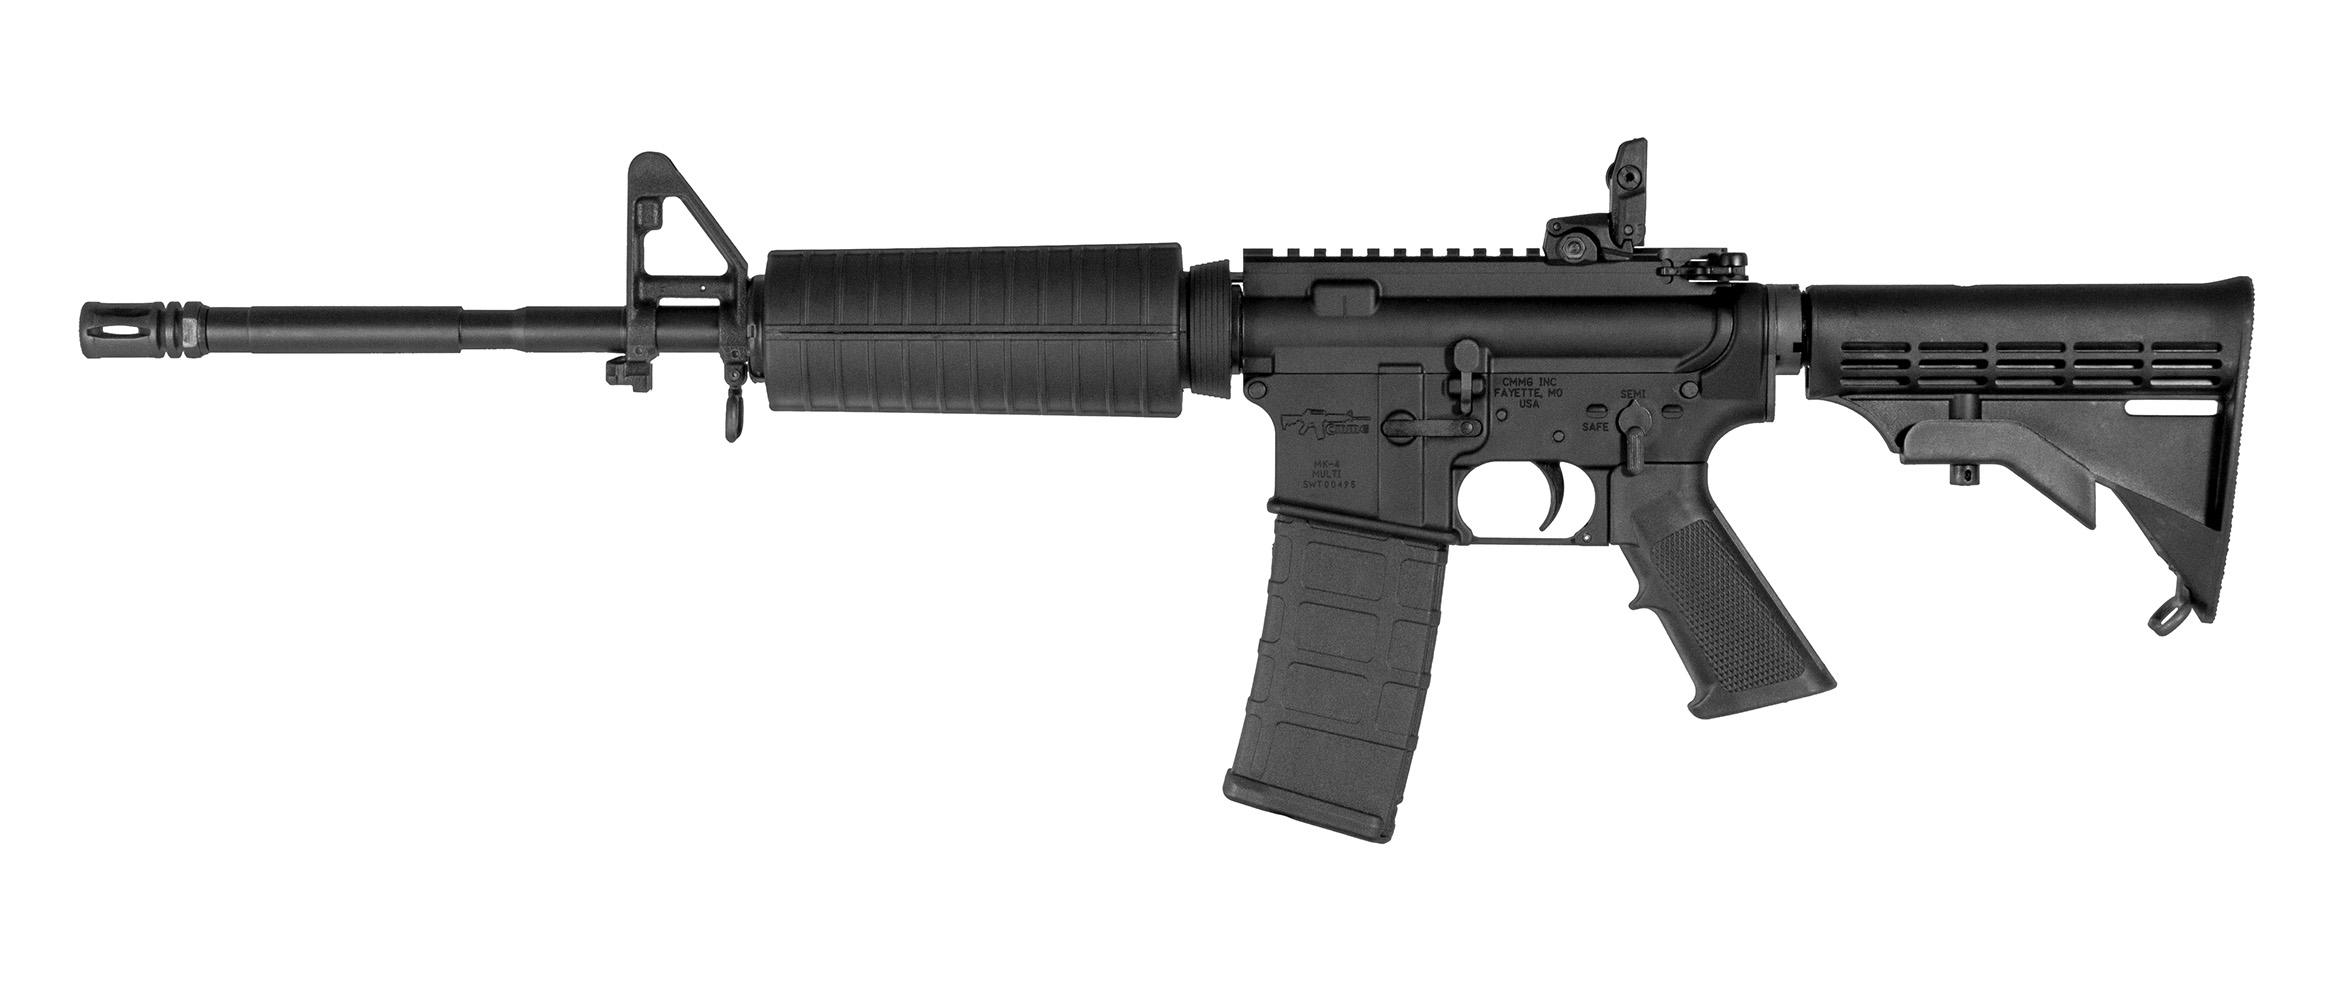 CMMG Rifle, Mk4LE, 5.56mm 55AE160 Black Label Tactical. 